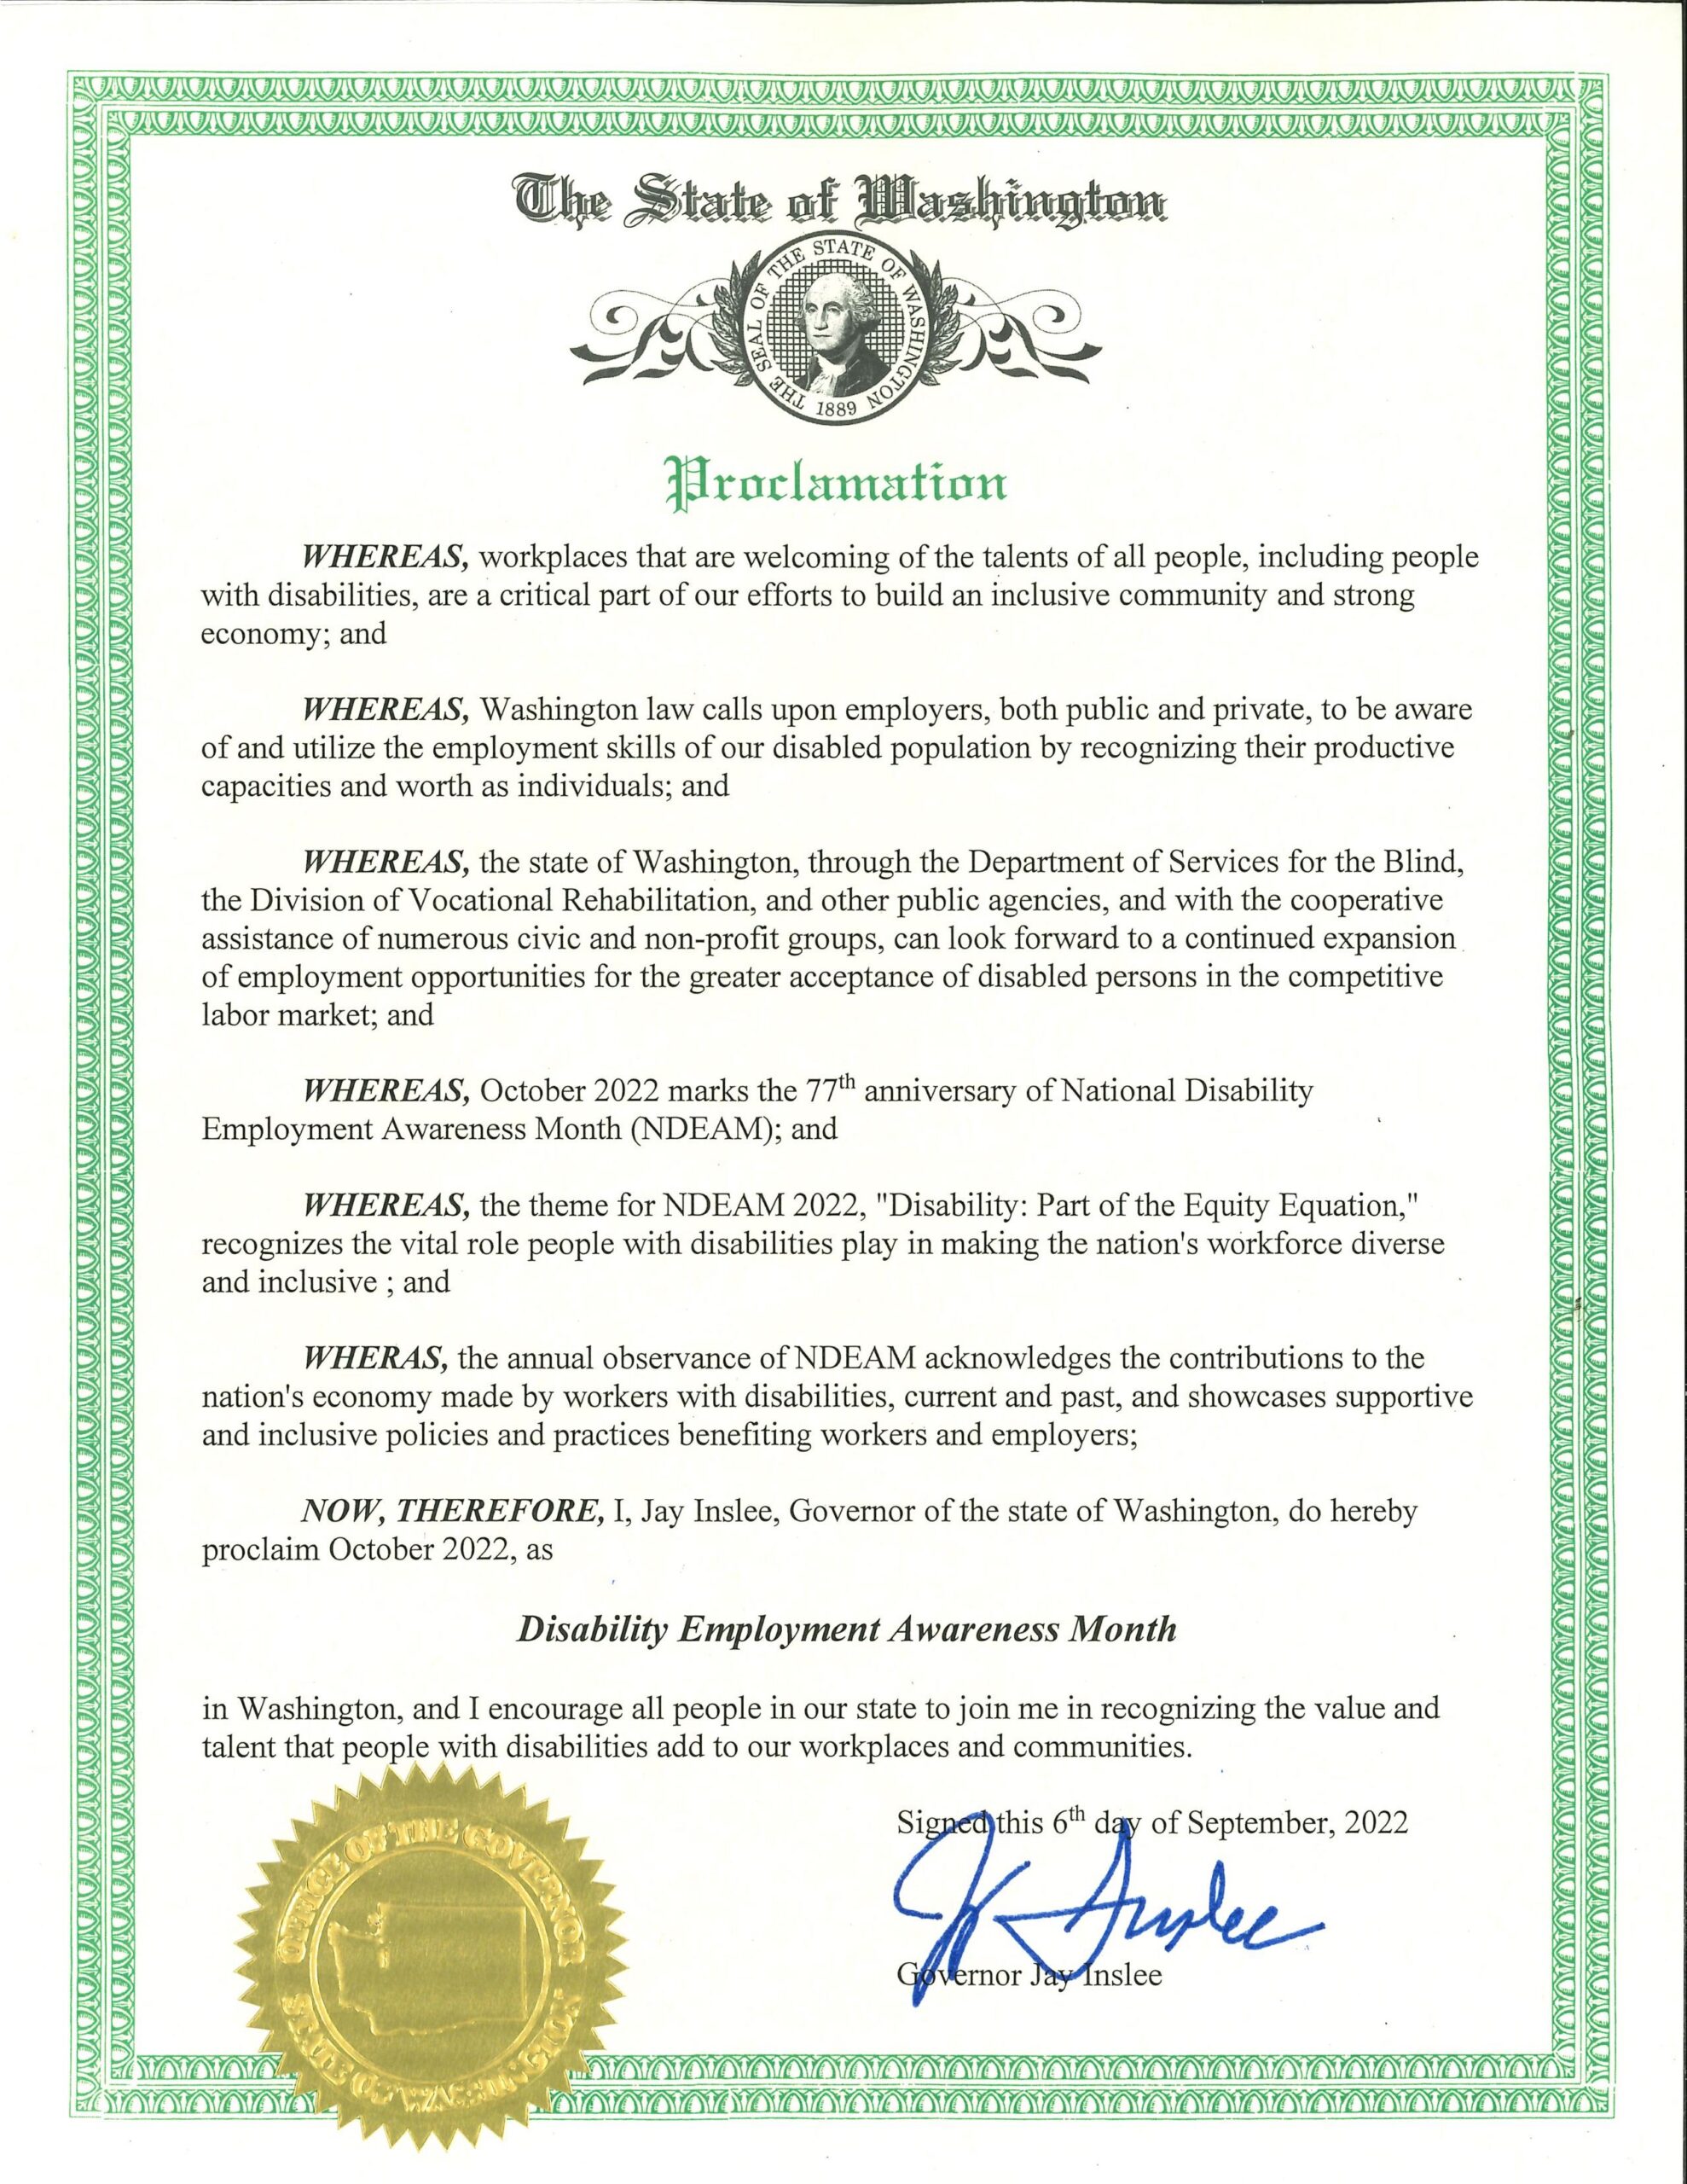 WA State Governor Jay Inslee's Proclamation of National Disability Employment Awareness Month in October